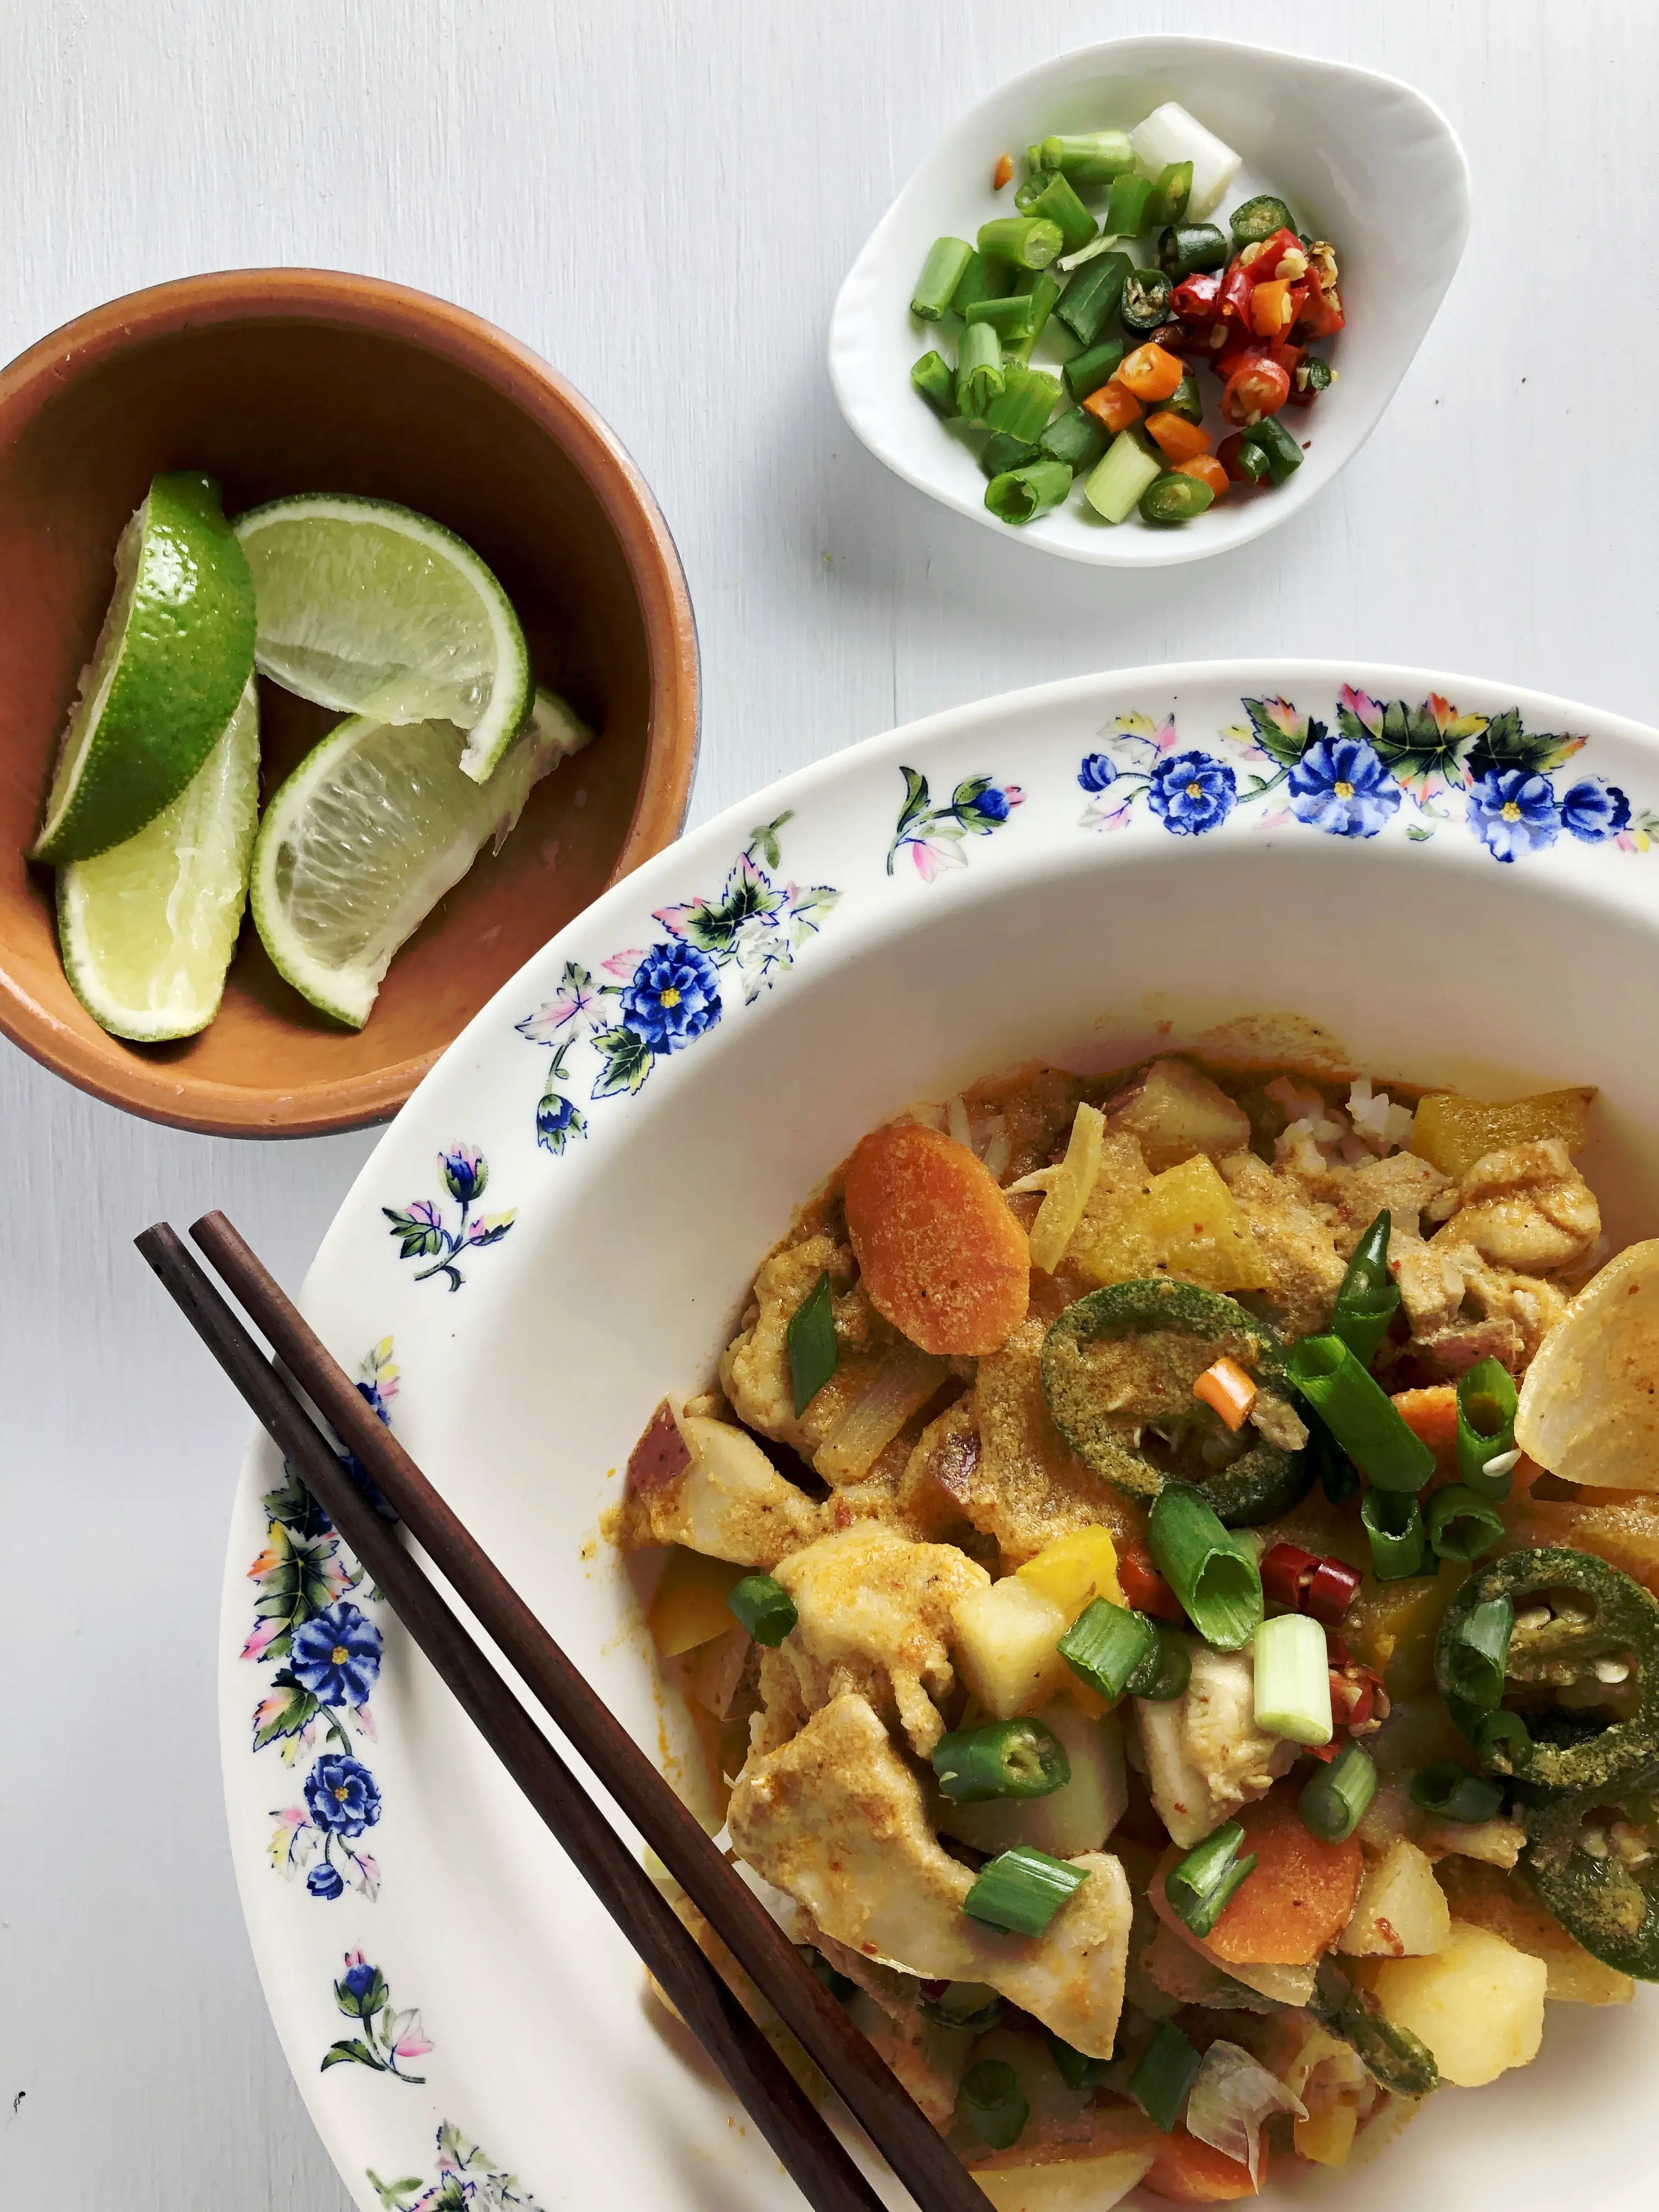 Thai Red Curry with limes, green onions, and chilis